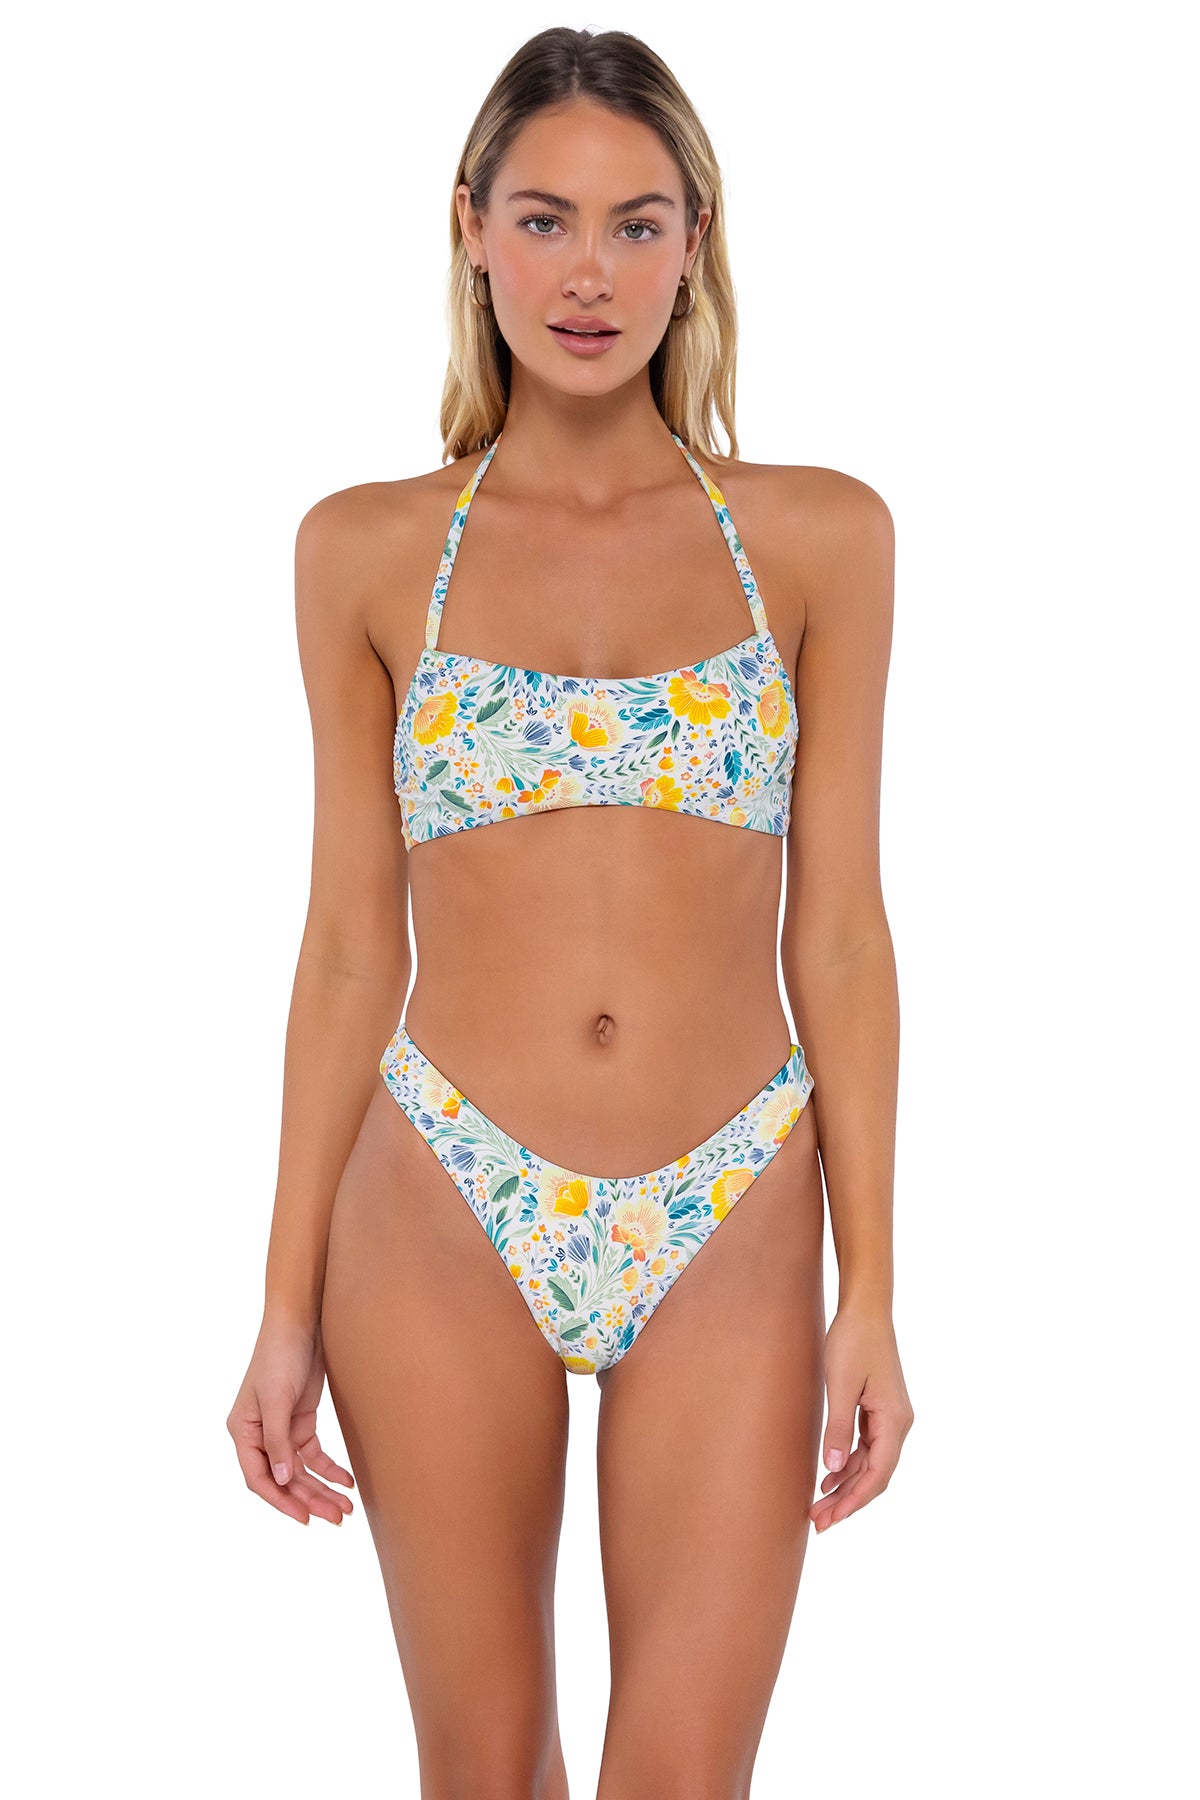 Front pose #1 of Jessica wearing Swim Systems Golden Poppy Camila Scoop Bottom with matching